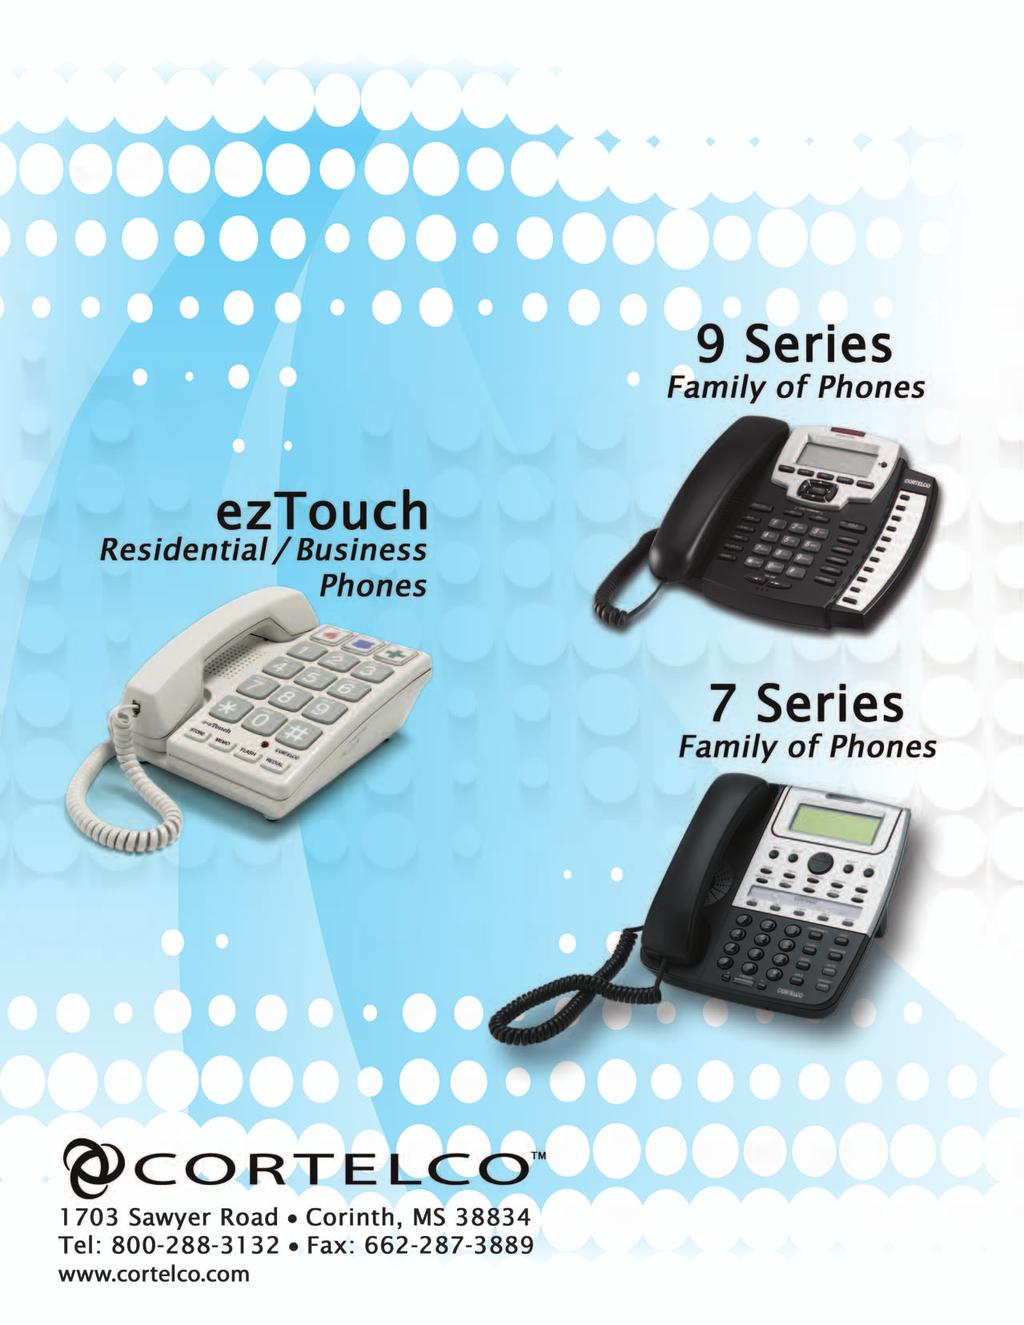 At Cortelco, our vision is to supply you with the industry s most advanced telephone products.